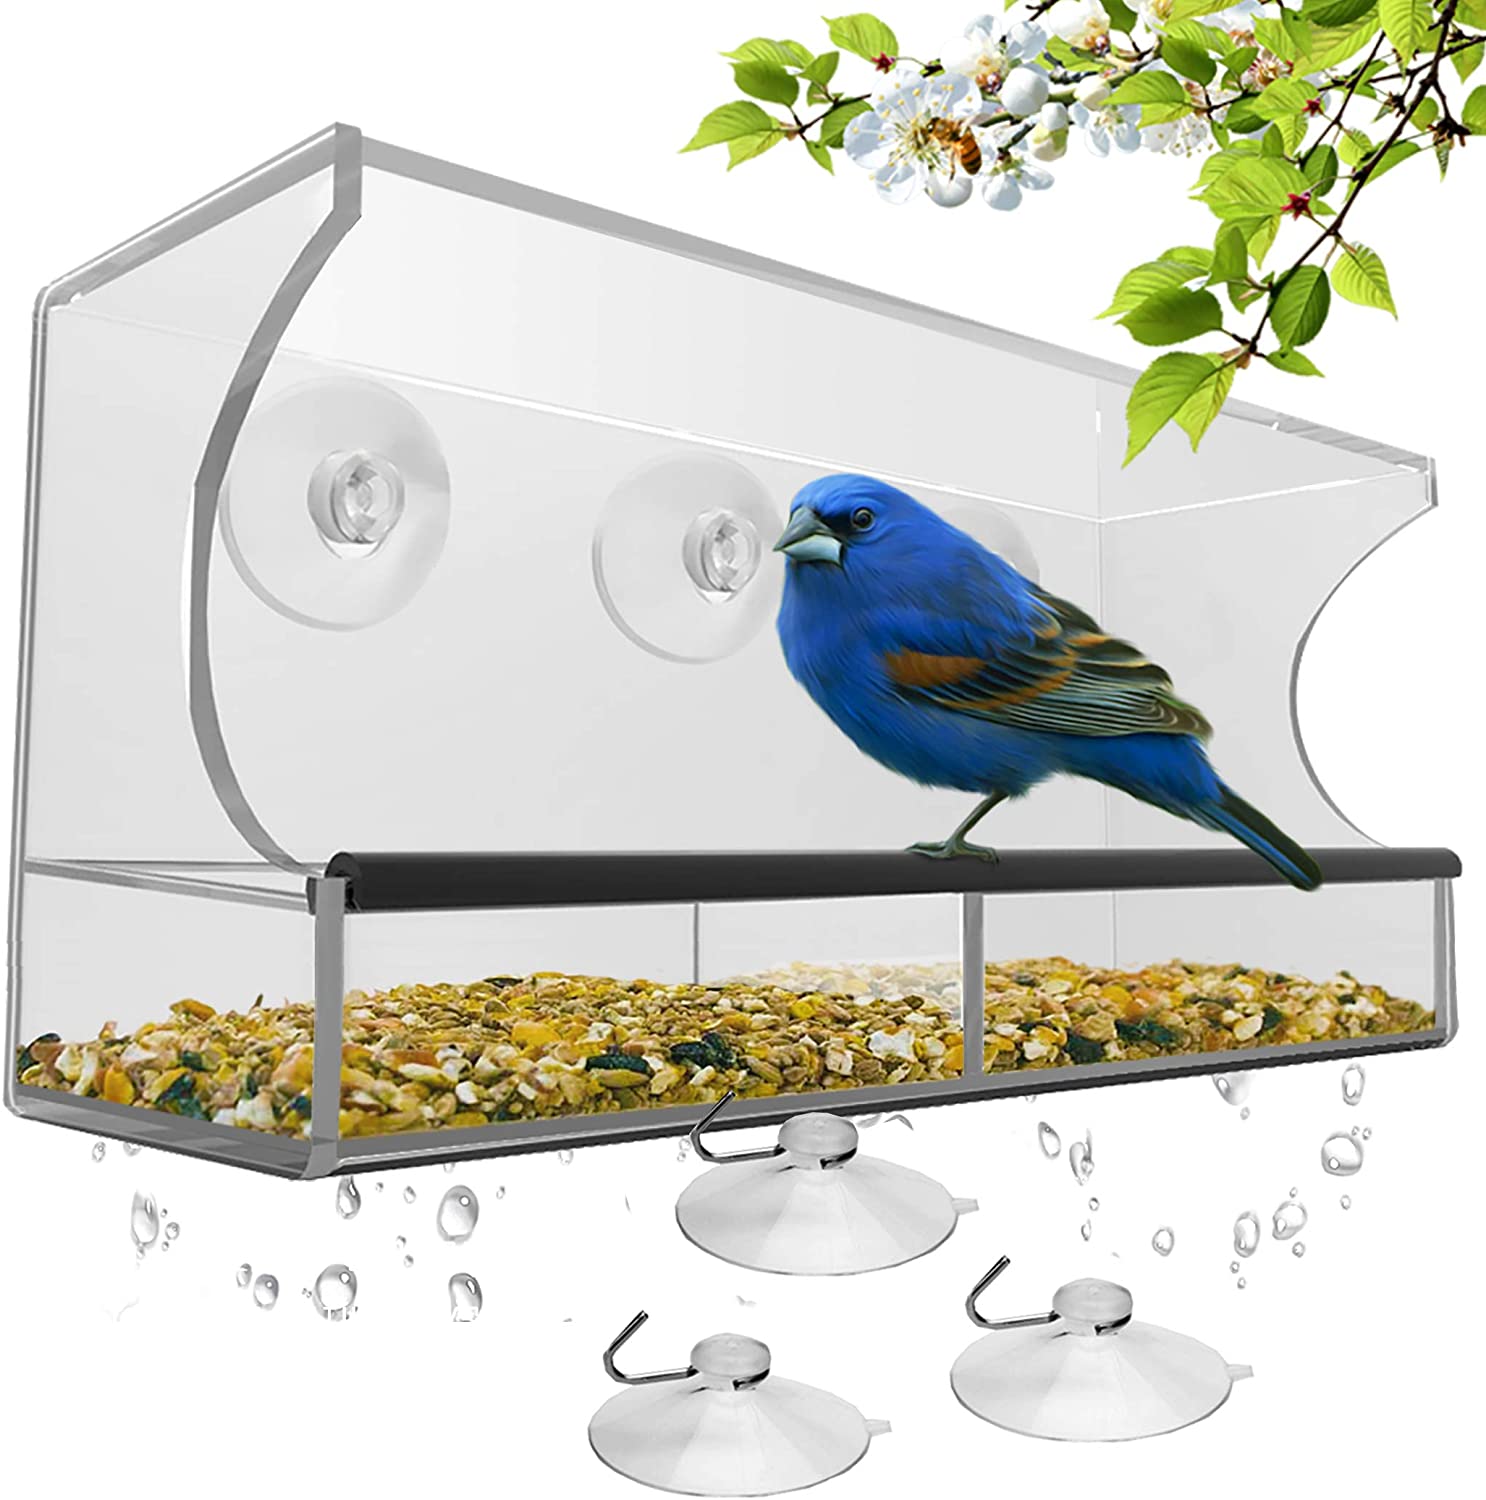 Large Clear Window Bird Feeder Enjoy Birds Close From Inside House Best For Kids And Pets Mounts With 3 All-Weather Suction Cups